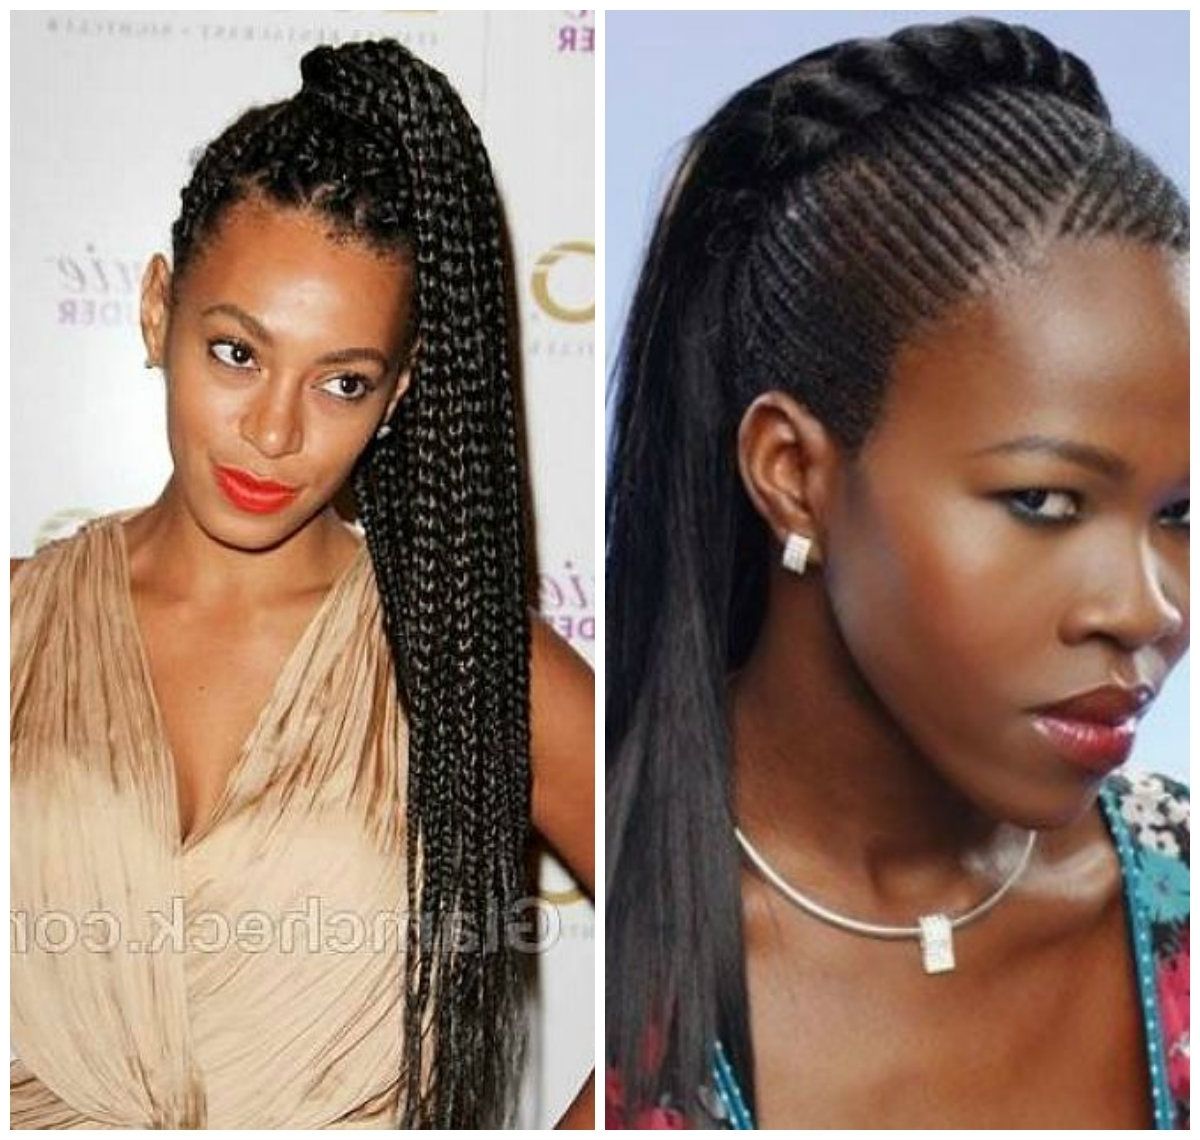 Newest Braided Mohawk Pony Hairstyles With Tight Cornrows Intended For Hot African American Stone Age Inspired Braided Hairstyle Ideas (View 19 of 20)